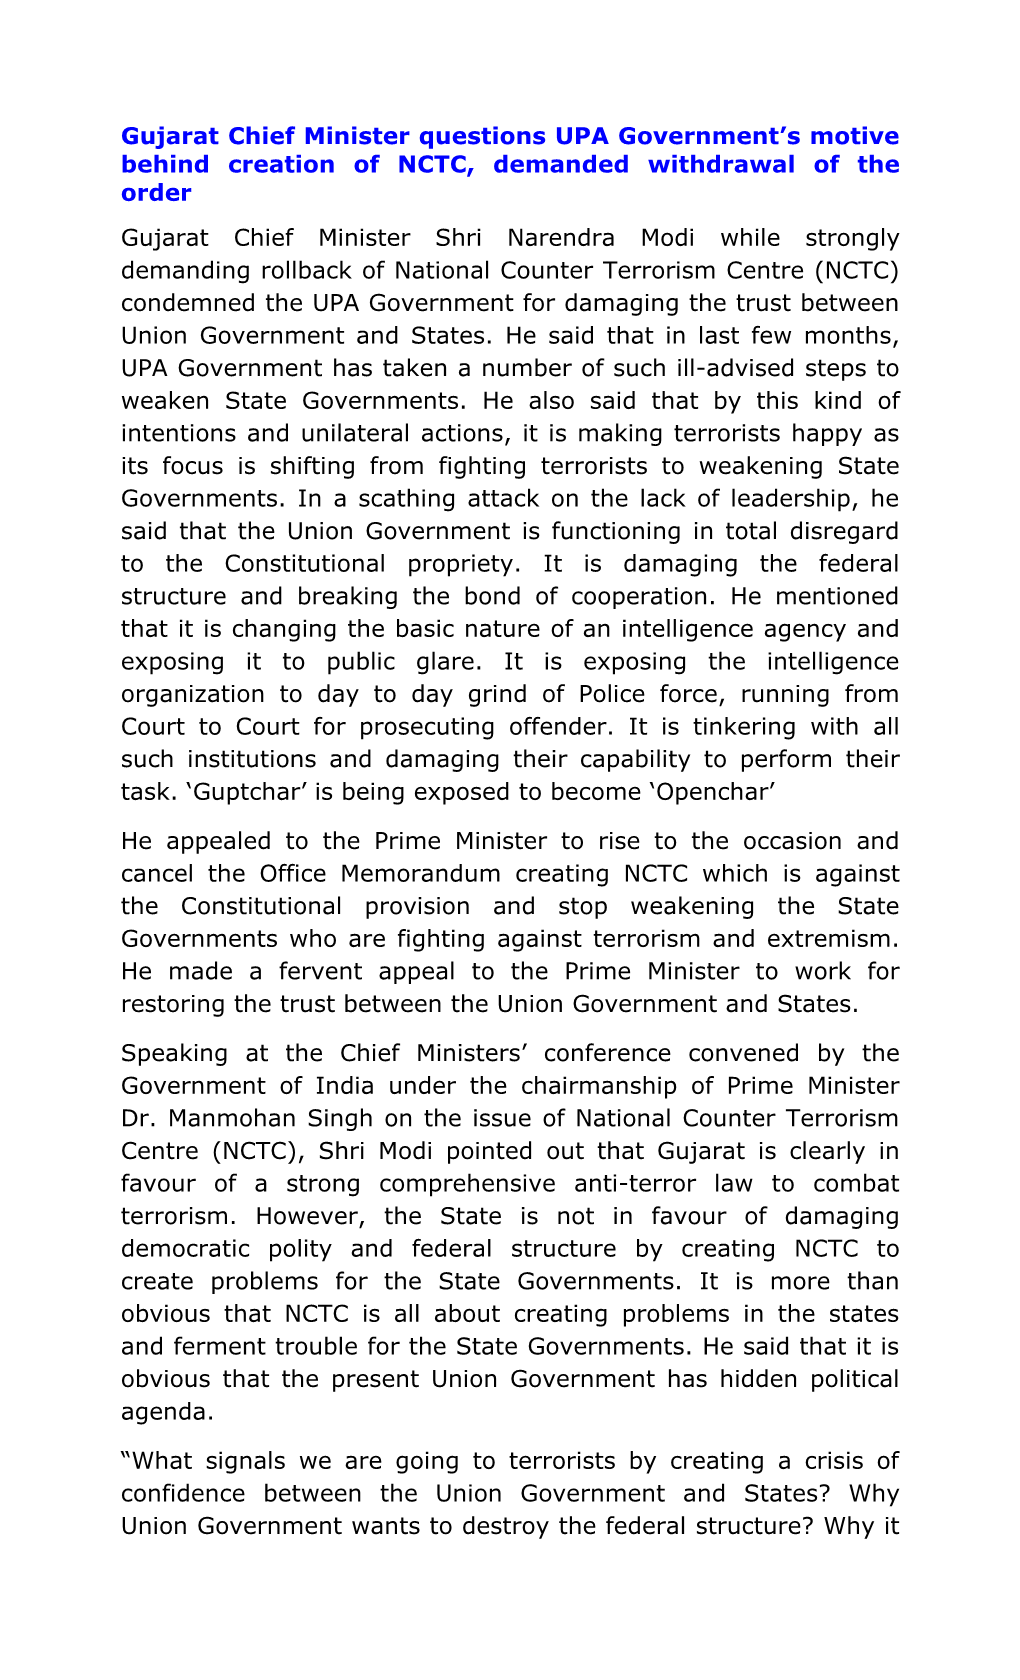 Gujarat Chief Minister Questions UPA Government S Motive Behind Creation of NCTC, Demanded